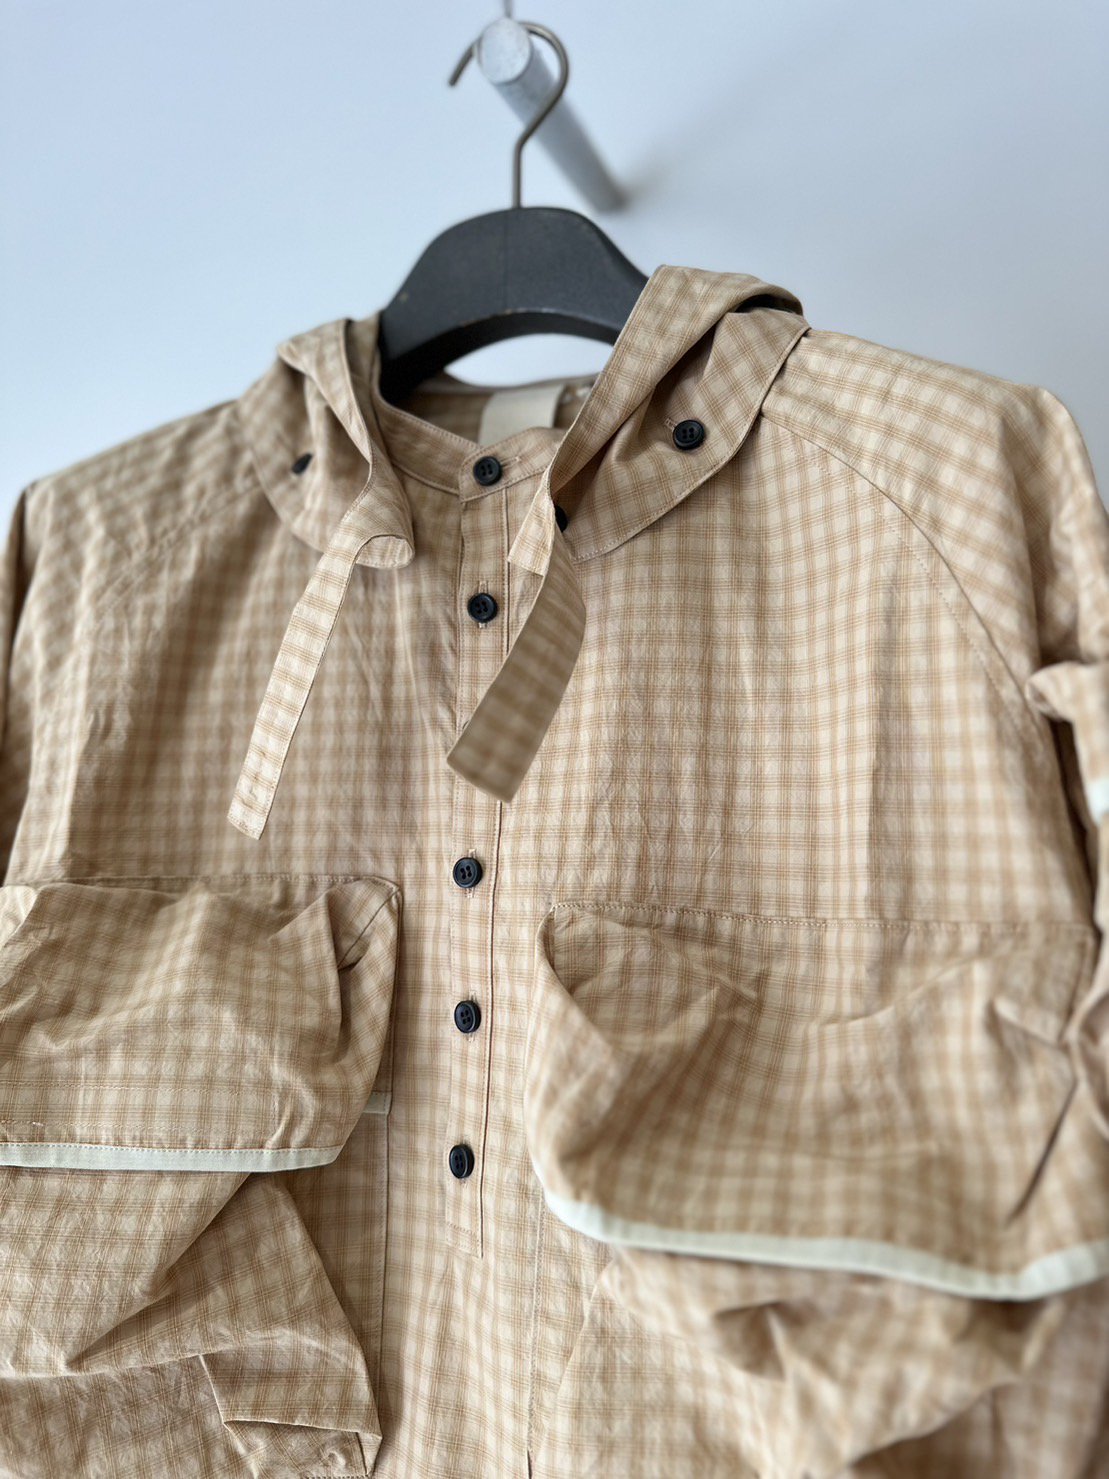 JIAN YE<br />STEPED SHIRT / CHECK<img class='new_mark_img2' src='https://img.shop-pro.jp/img/new/icons14.gif' style='border:none;display:inline;margin:0px;padding:0px;width:auto;' />